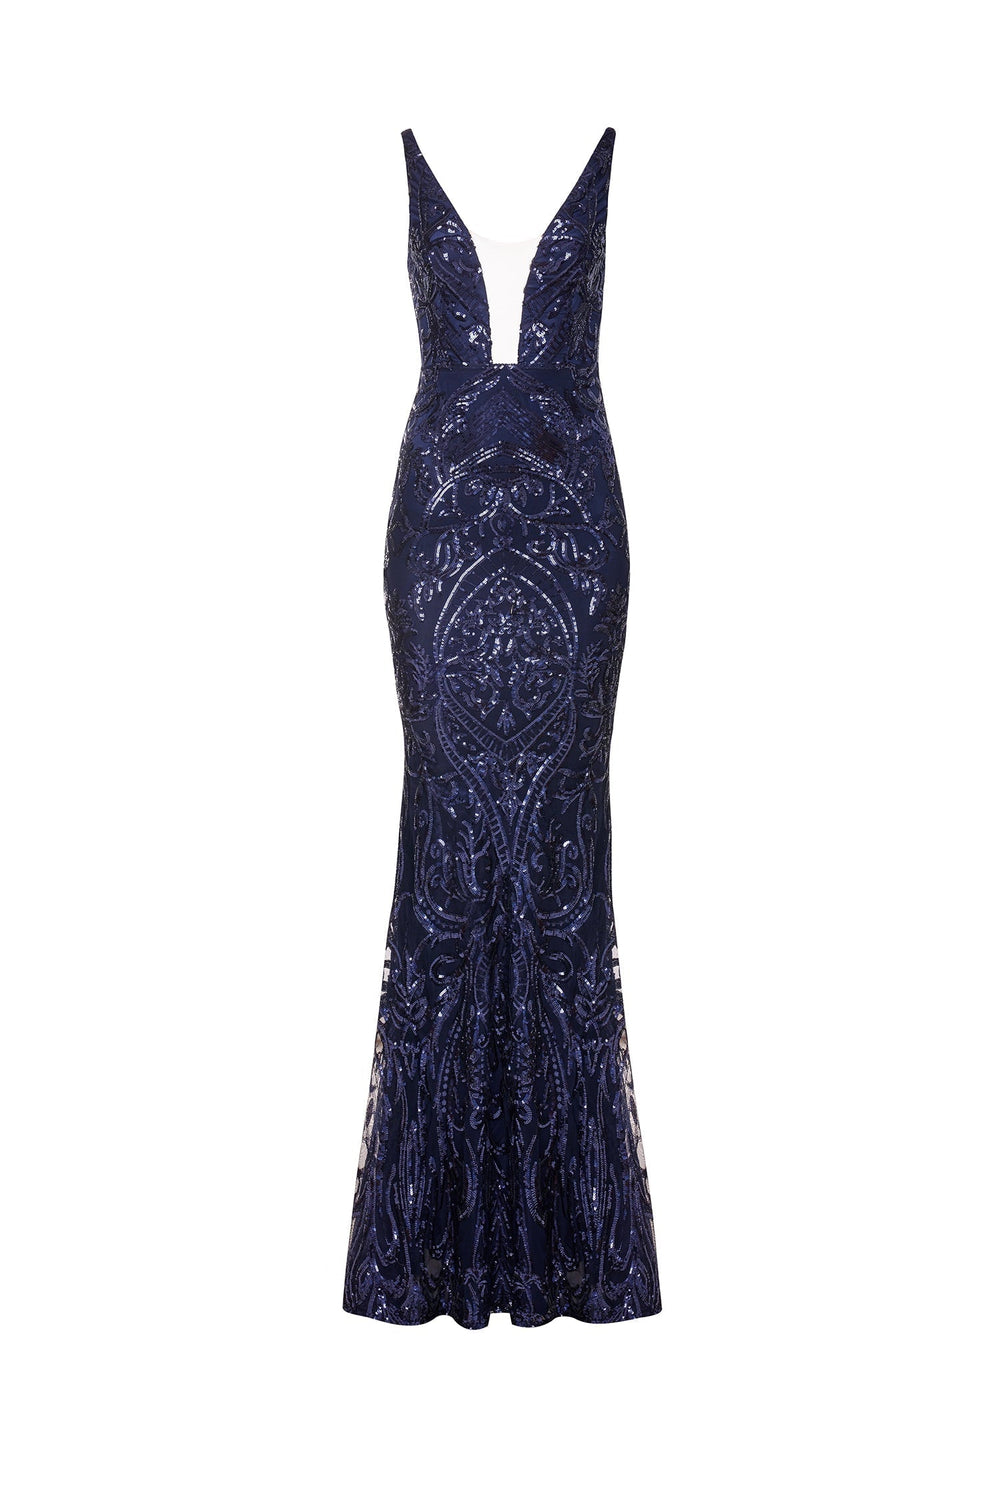 Salma - Navy Sequin Gown with Plunging Neckline and Mermaid Train